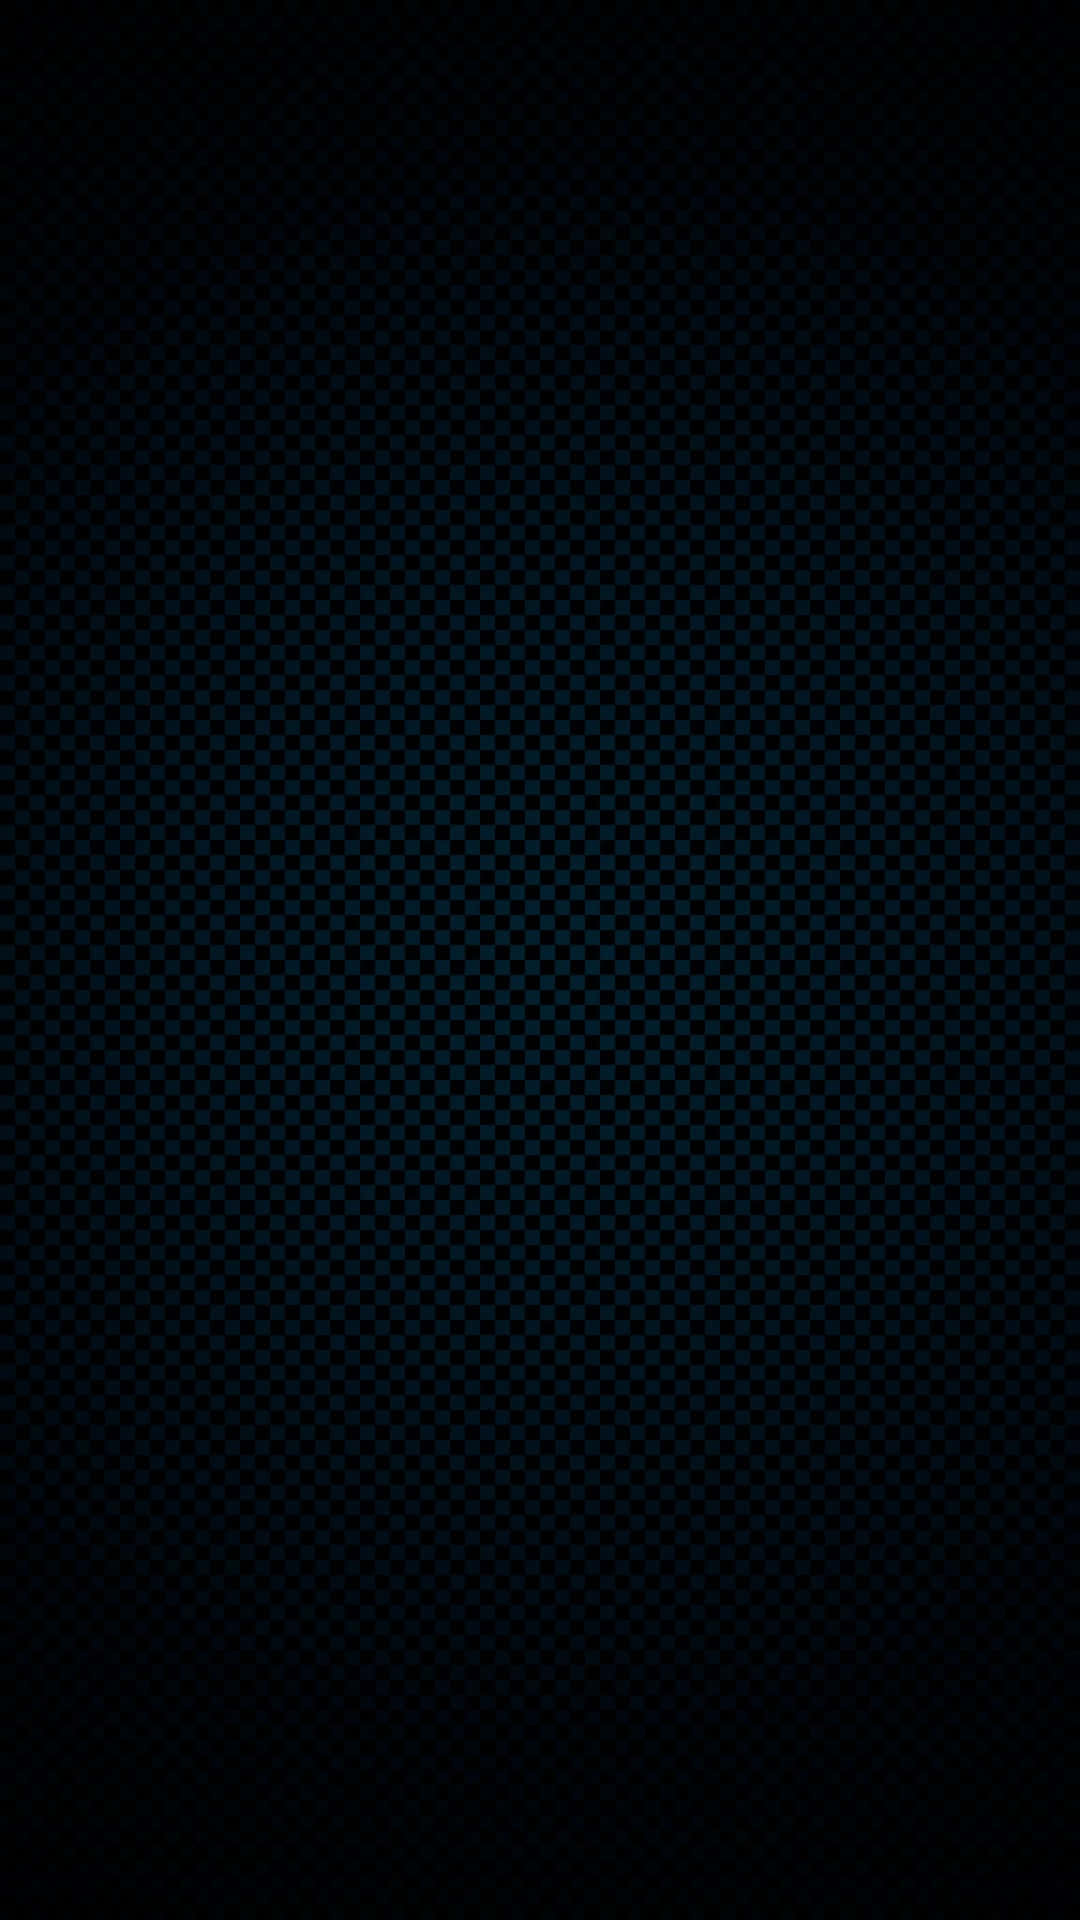 Black Ipad With Parallel Blue Dots Background